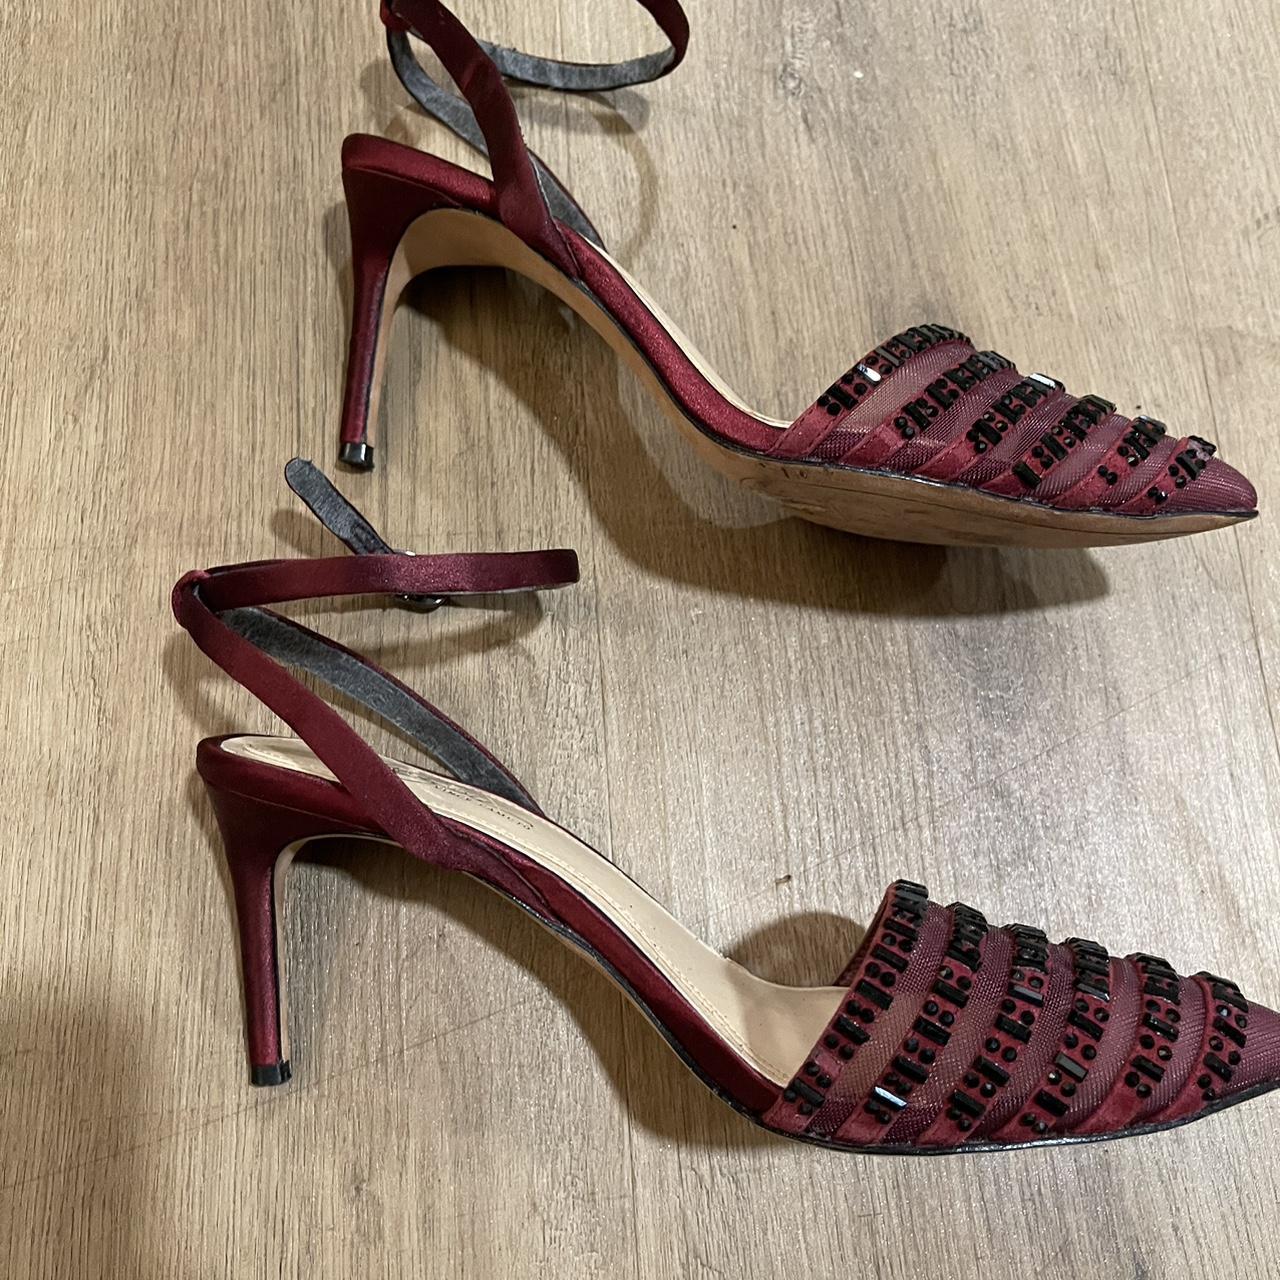 Vince Camuto Women's Burgundy Courts (2)